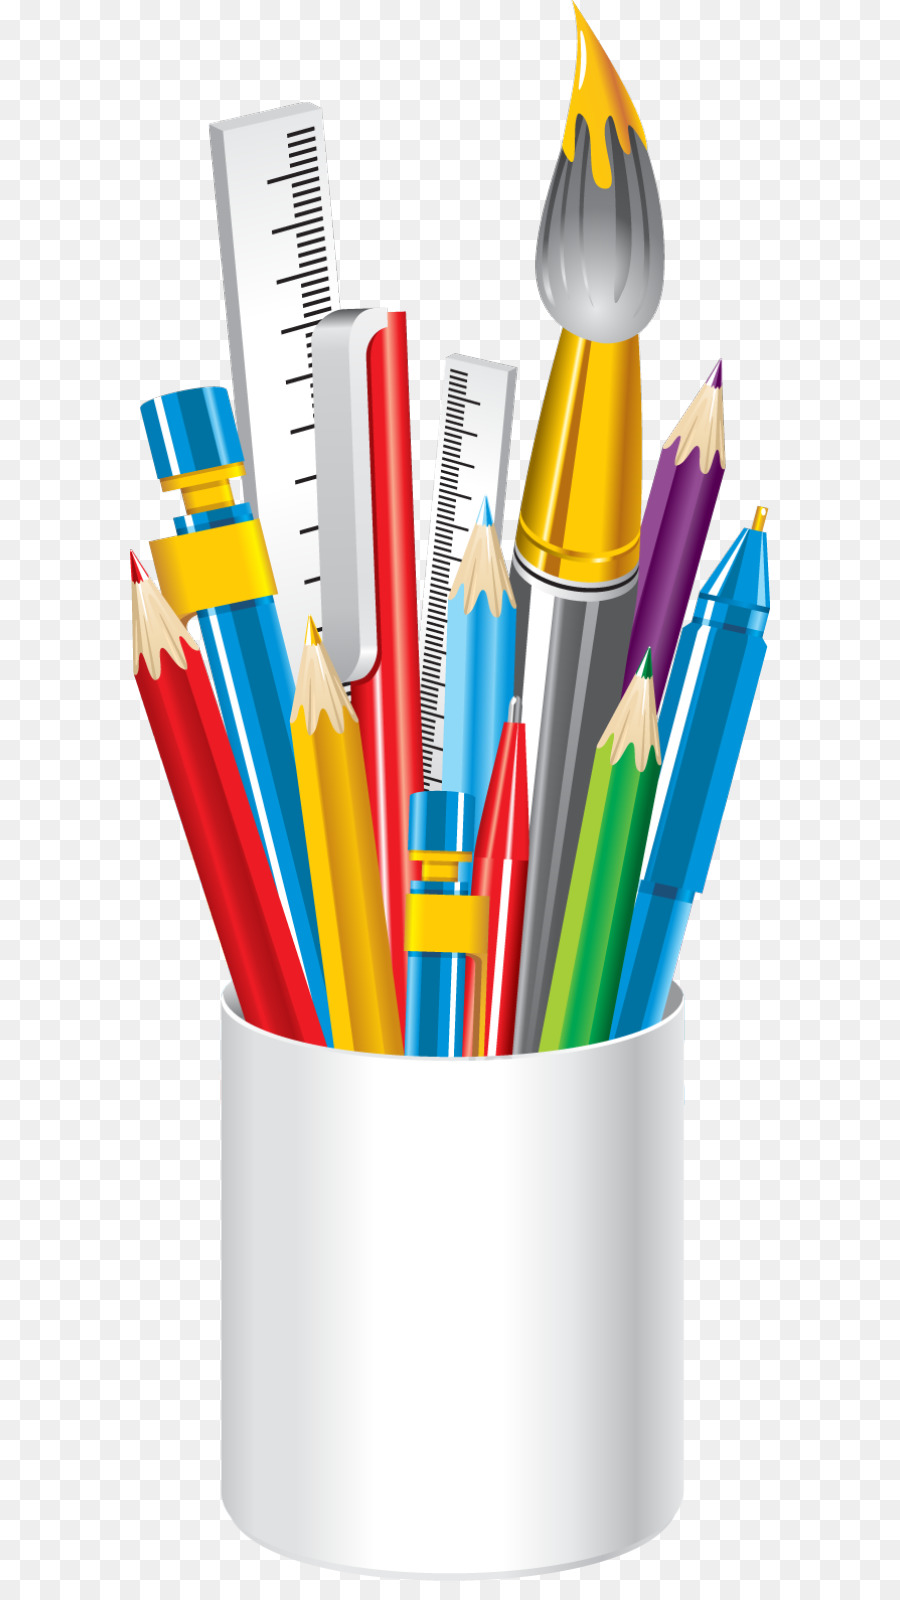 pencils clipart stationery